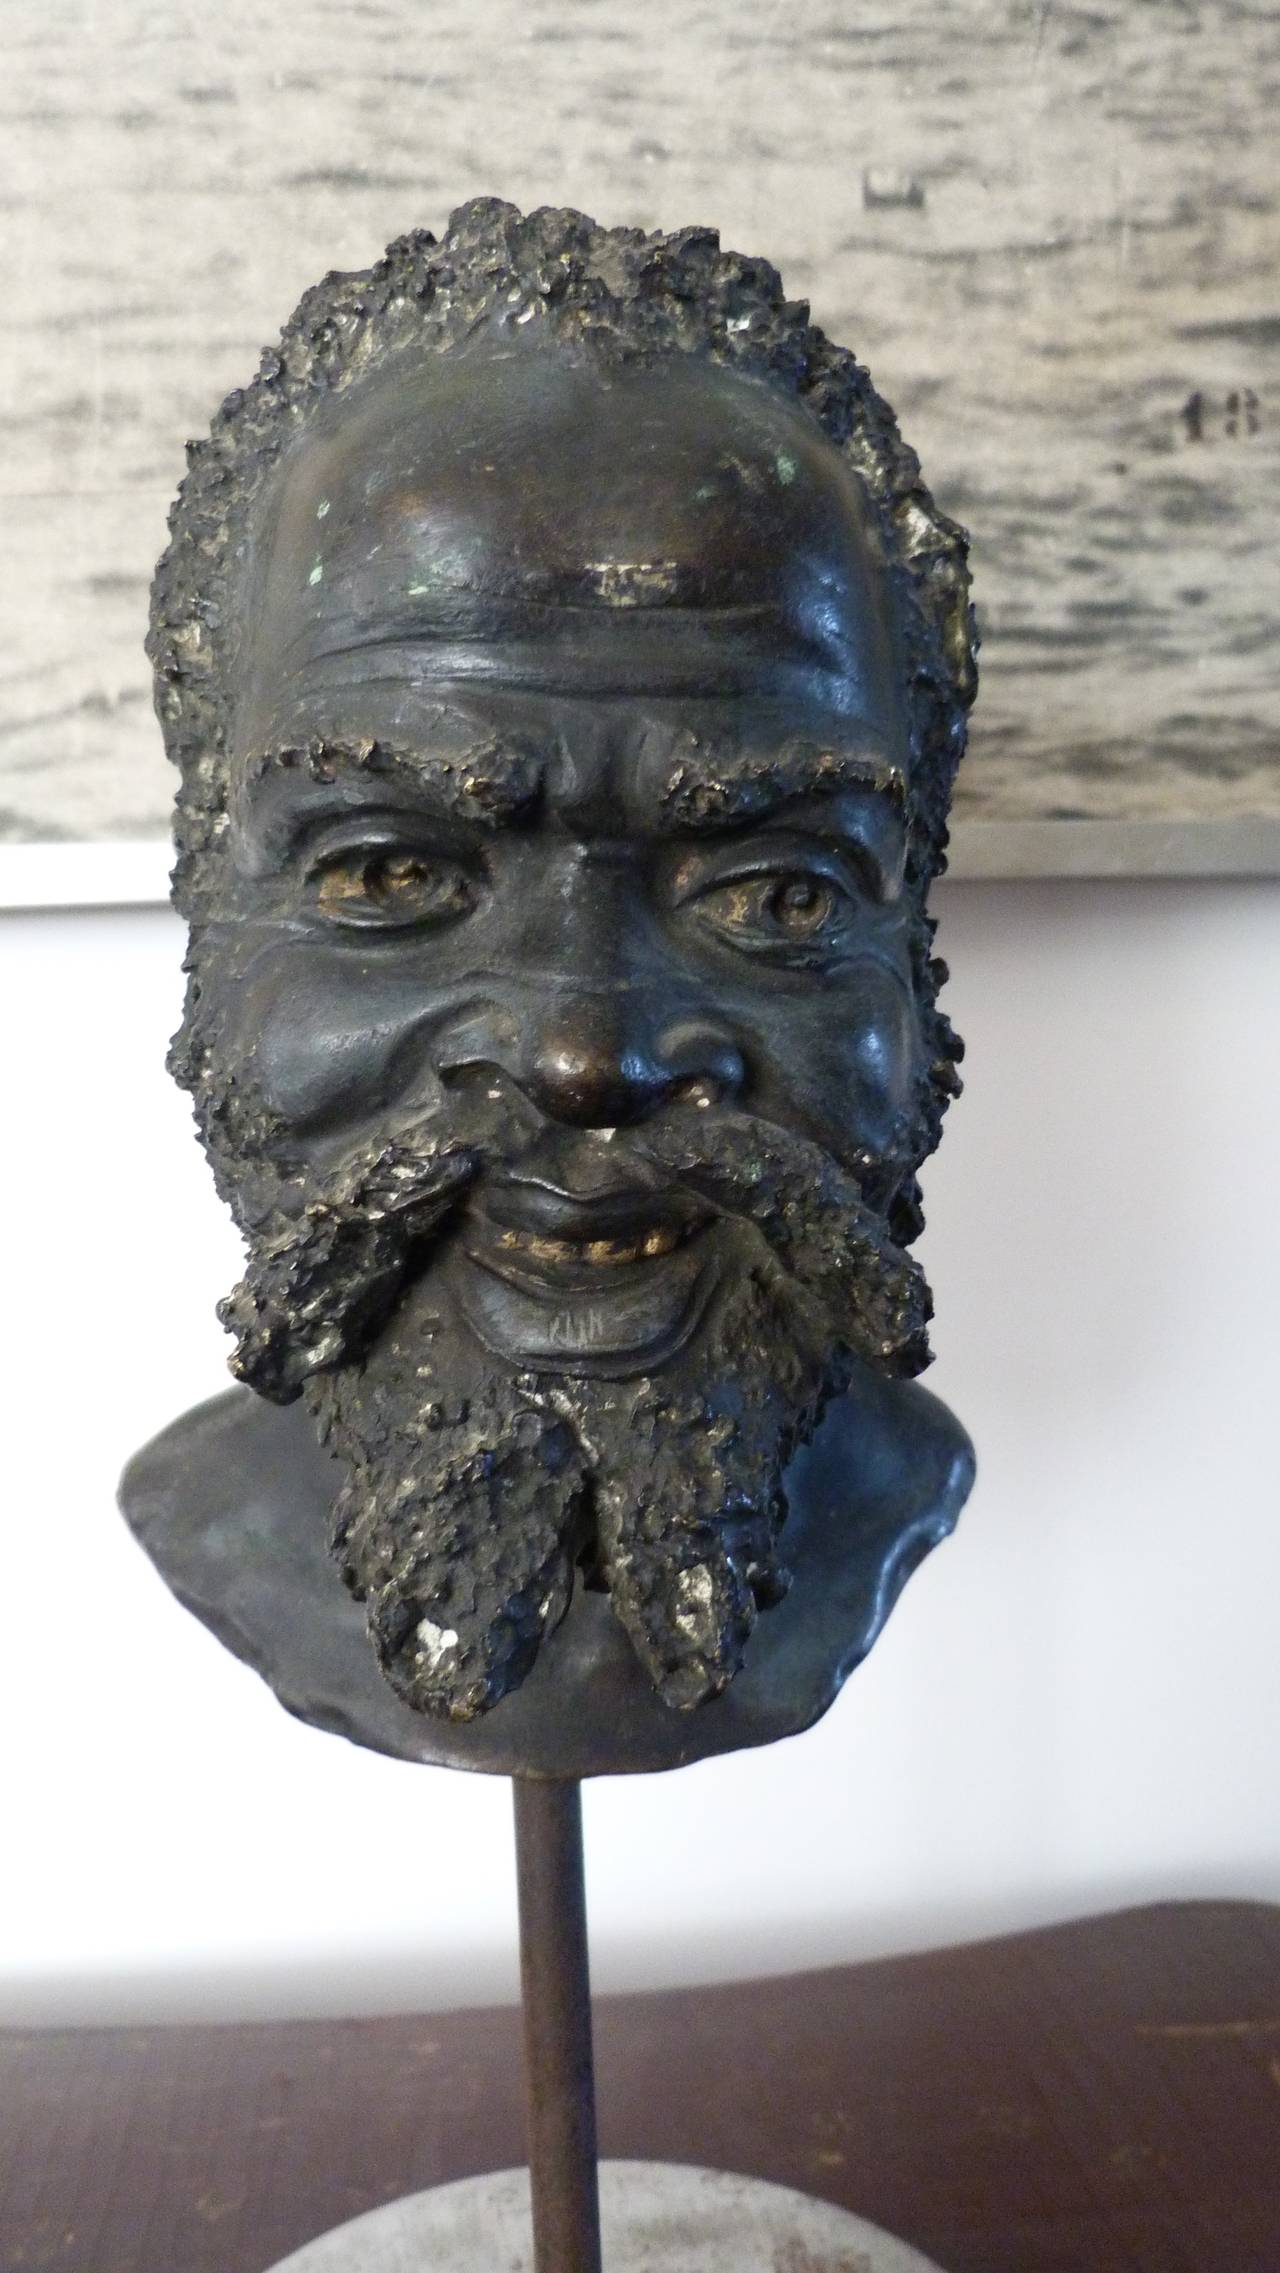 Pair of Blackmoores ( young and old ) bronze head sculptures. Both verso signed on the neck C. Mirra, late 19th early 20th century.

Measurements are stand included.